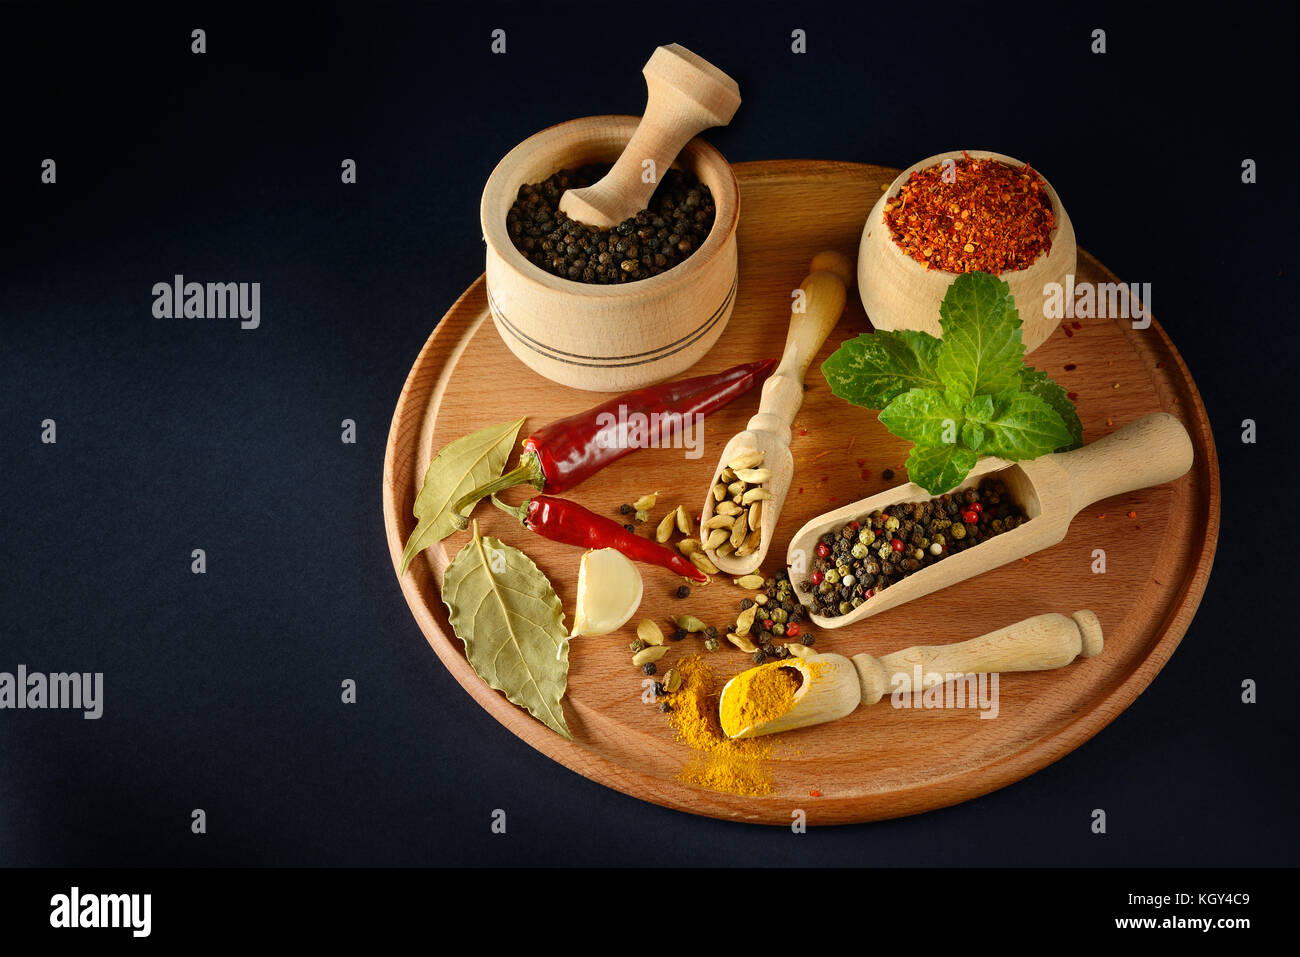 Variety spices and peanuts in wooden spoons and cups on black background. Free space for text. Top view. Stock Photo